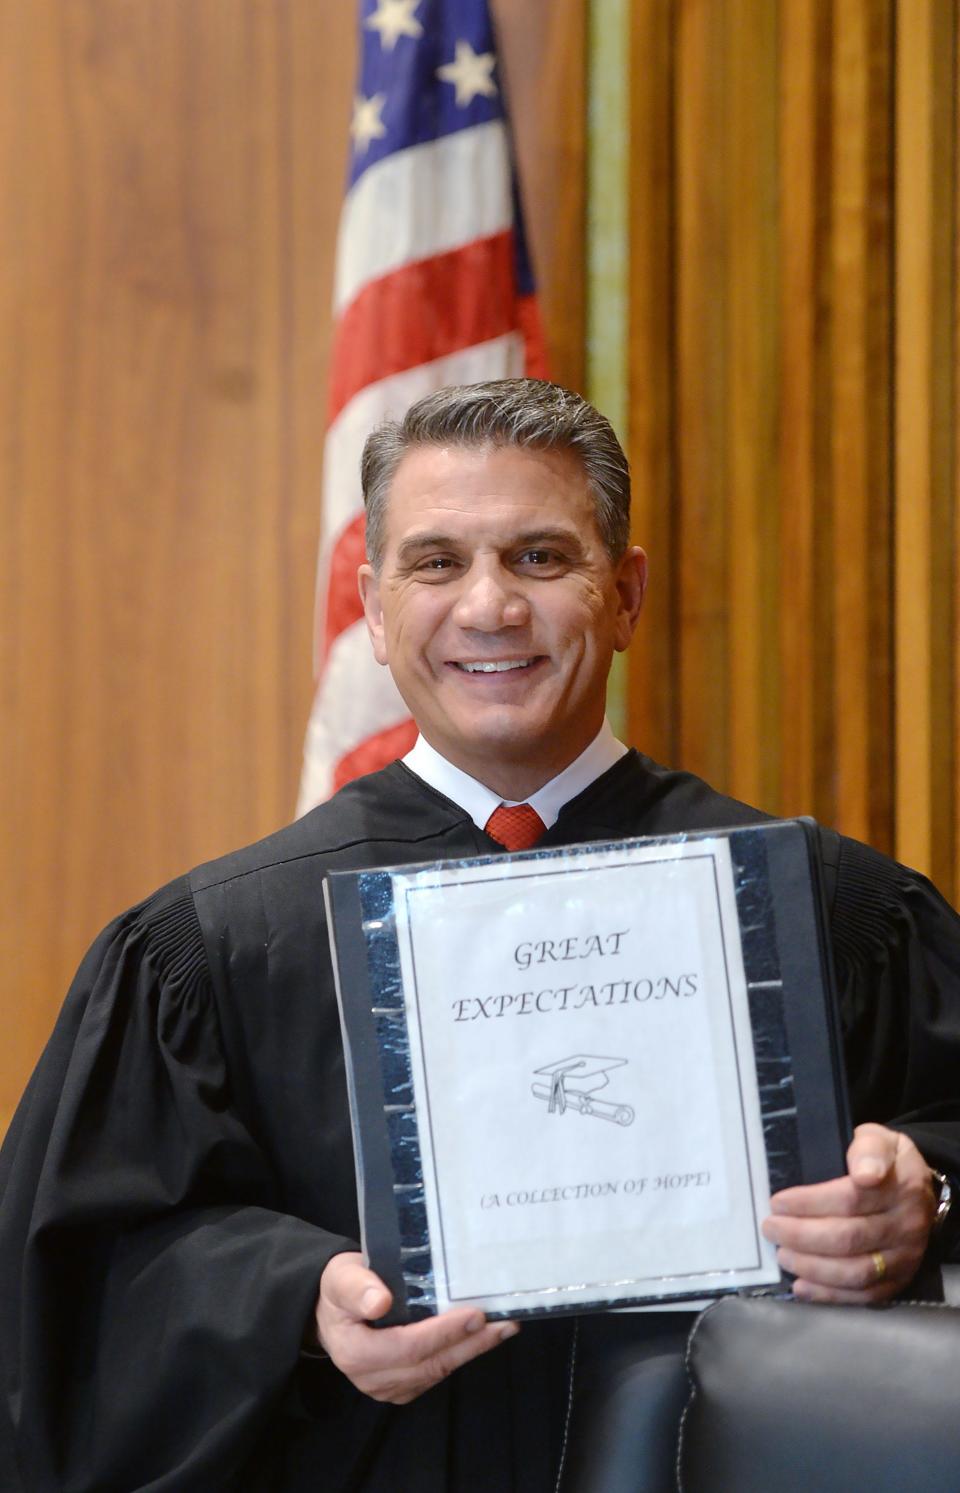 Erie County Judge John Trucilla holds a binder of diplomas and certificates from young people he has helped by requiring them to earn a GED or diploma before they can be discharged from court supervision. Trucilla was shown at the Erie County Courthouse in Erie on Feb. 29, 2024. Trucilla is calling for the creation of a local GED program for youth.